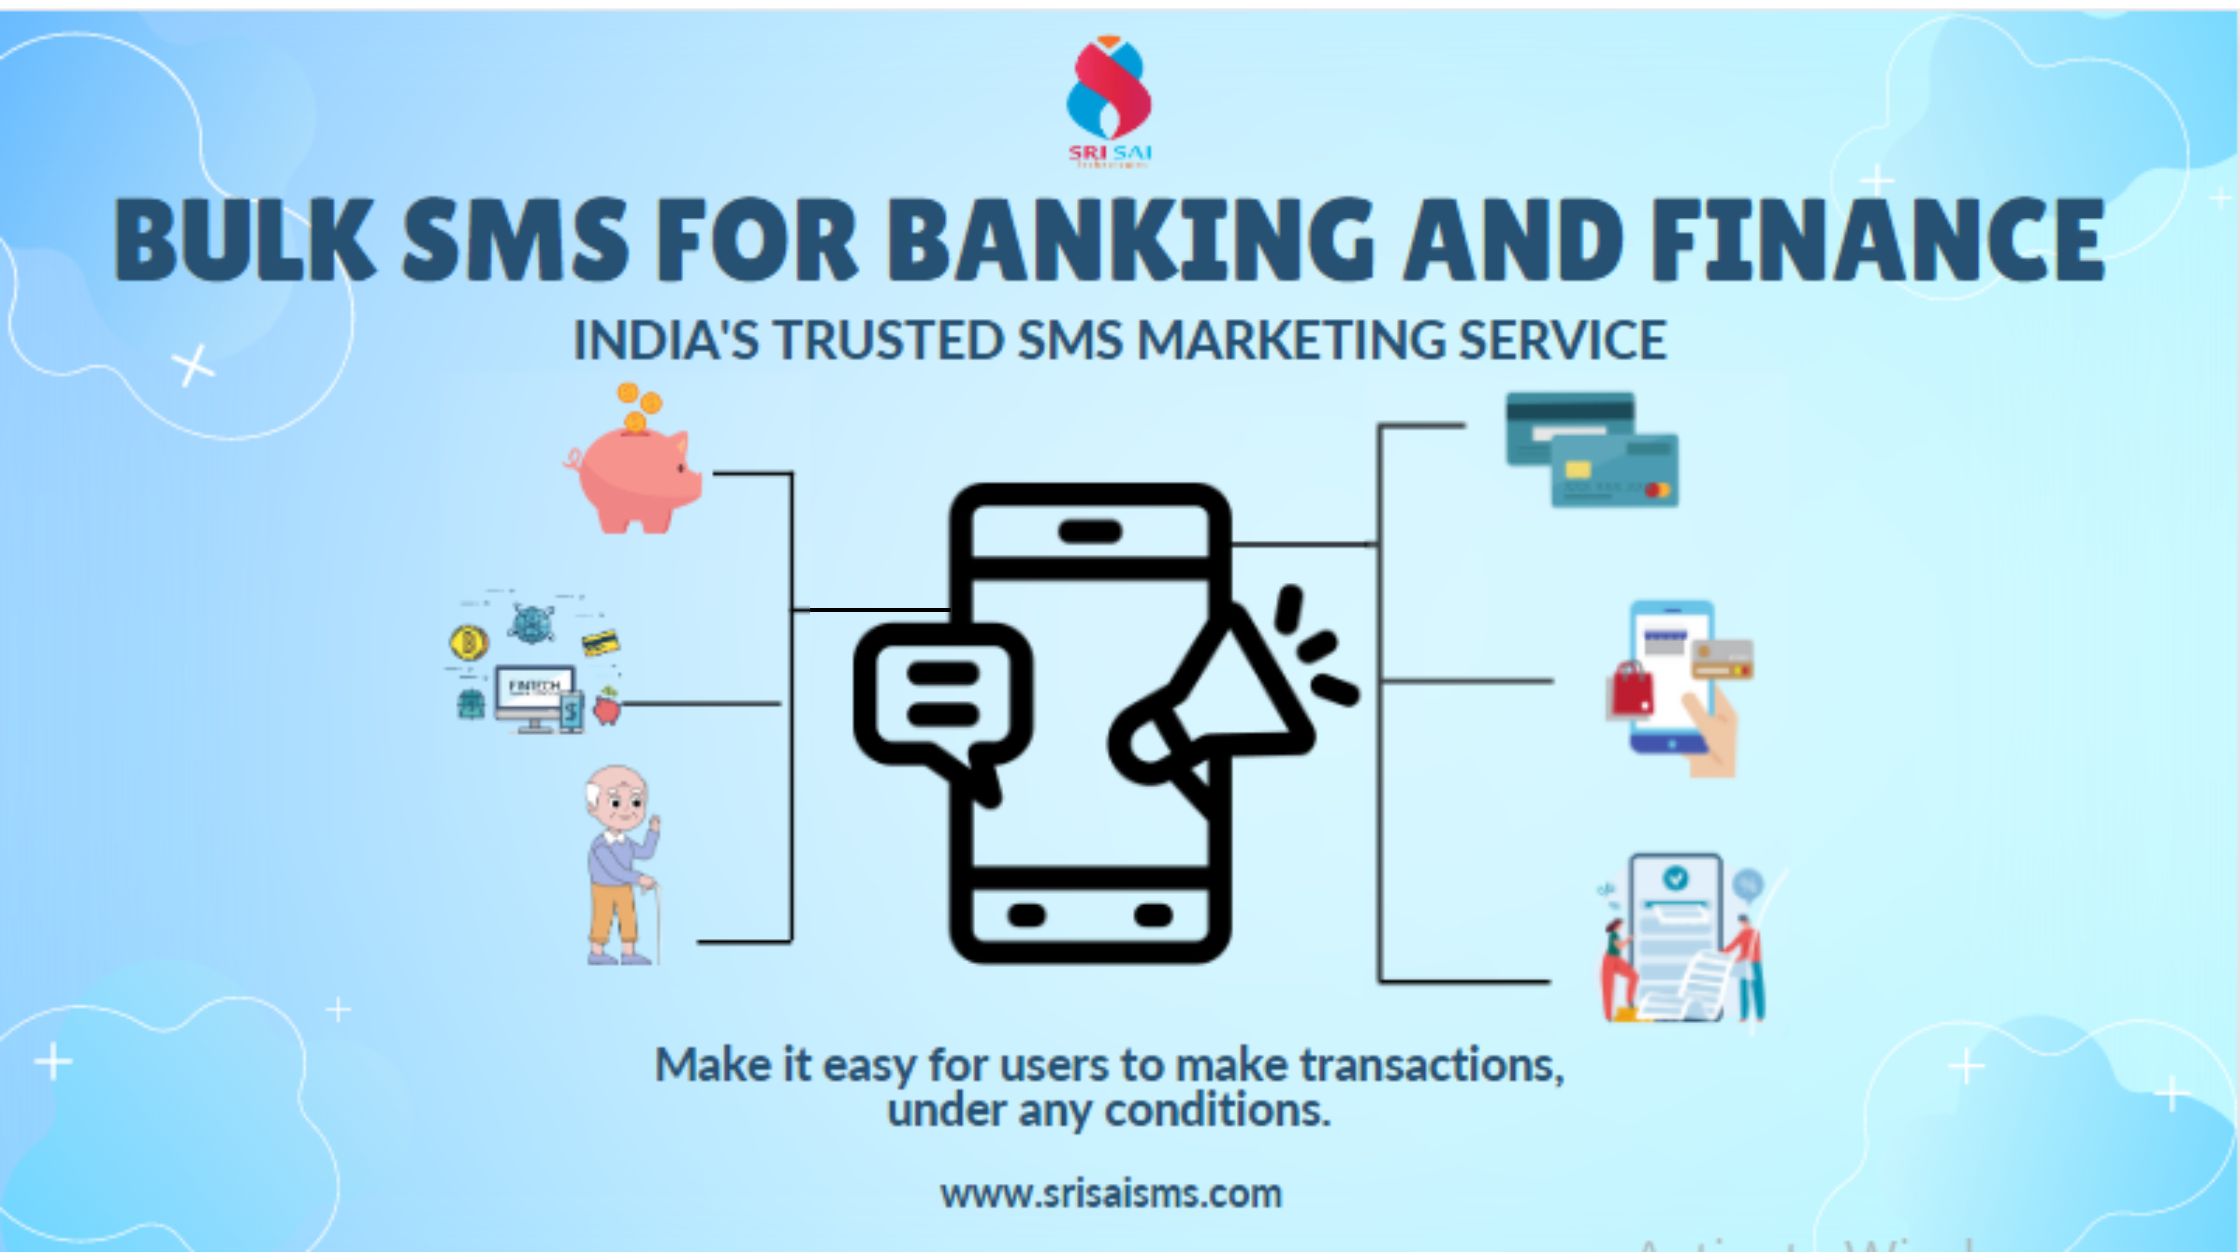 The image depicts the importance and benefits of bulk sms for banking and finance services and institutions. sri sai technologies has tremendous advantages as your bulk sms service providers.